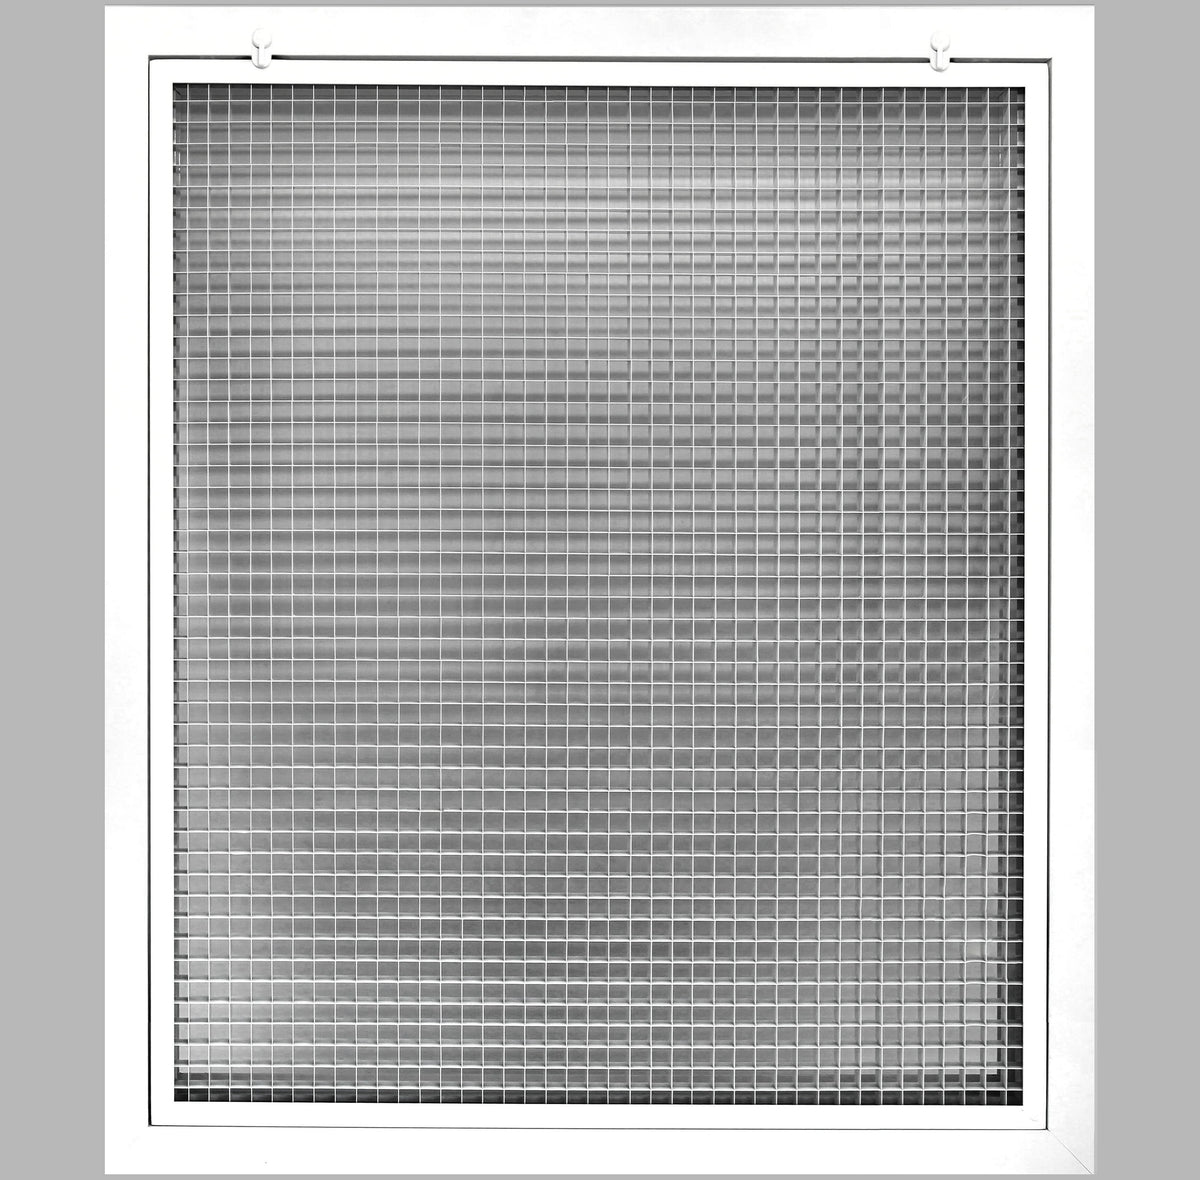 34&quot; x 36&quot; Cube Core Eggcrate Return Air Filter Grille for 1&quot; Filter